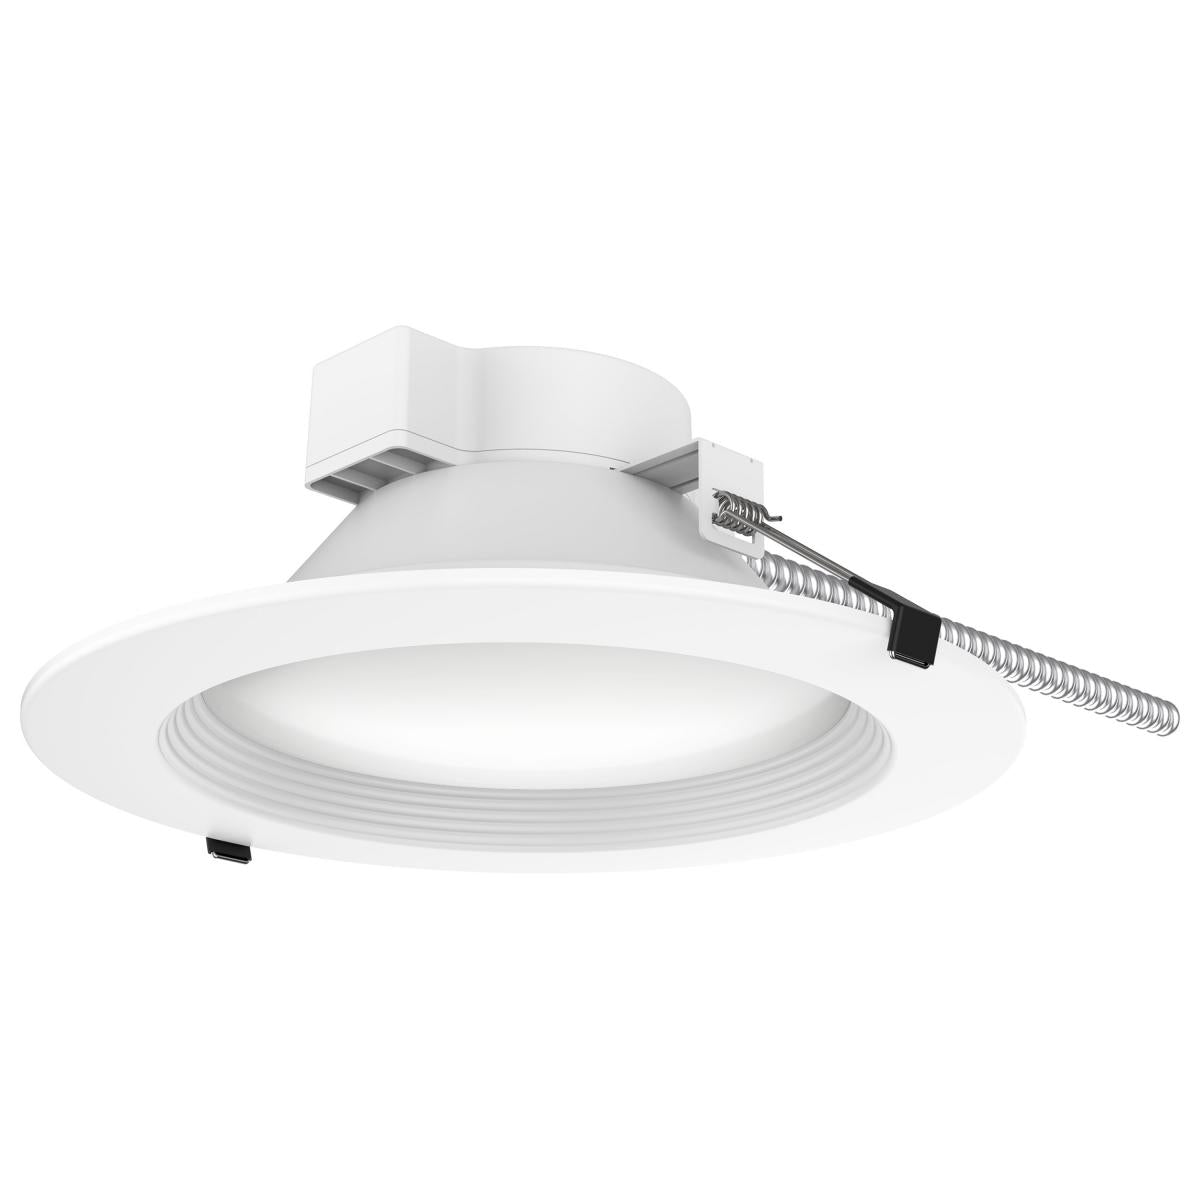 10 Inch Commercial LED Downlight, Round, 30 Watt, 3500 Lumens, Selectable CCT, 2700K to 5000K, Baffle Trim